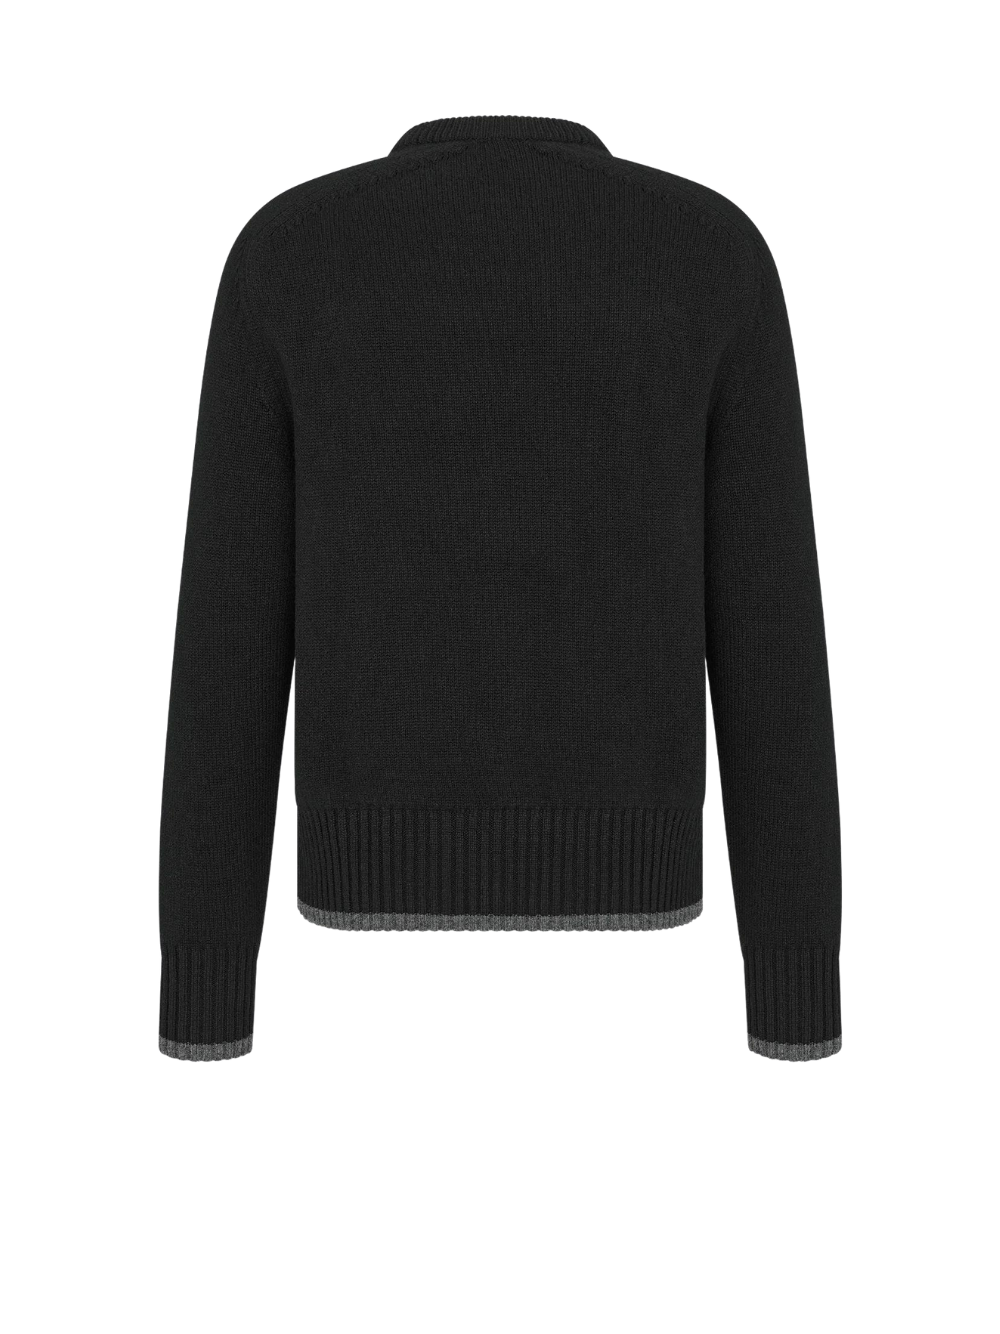 Dior Atelier Knit Sweater 213M640AT298